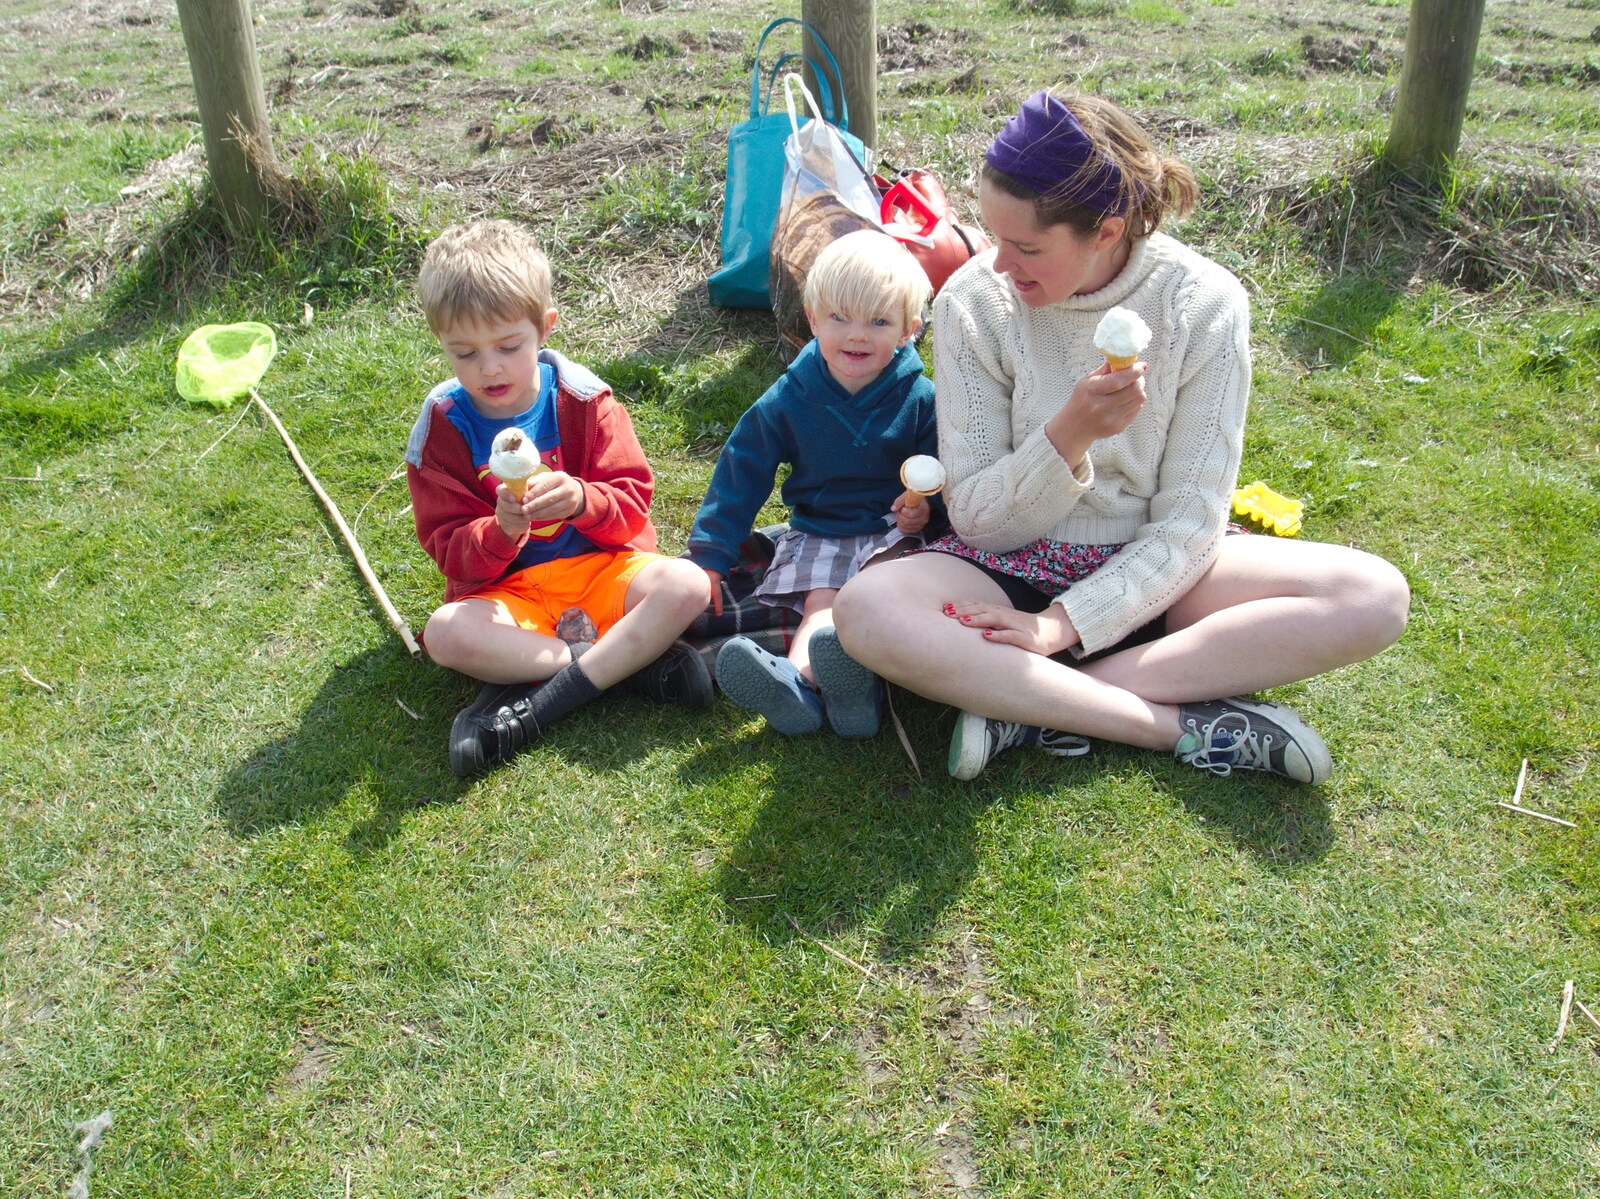 Isobel and the boys eat ice cream from Life's A Windy Beach, Walberswick, Suffolk - 5th May 2014